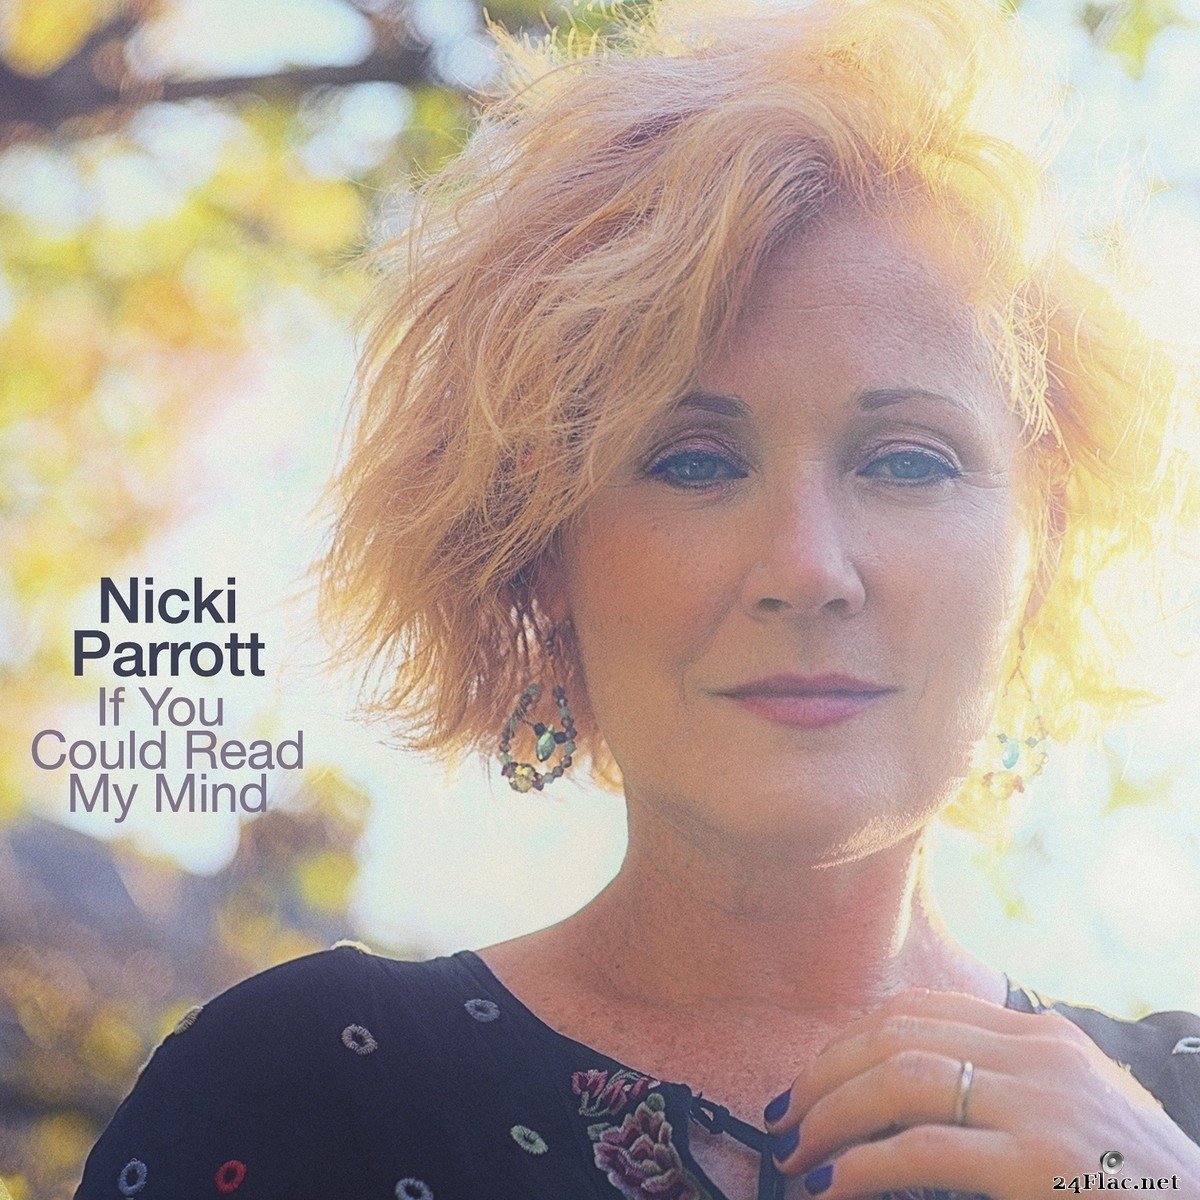 Nicki Parrott - If You Could Read My Mind (2021) FLAC